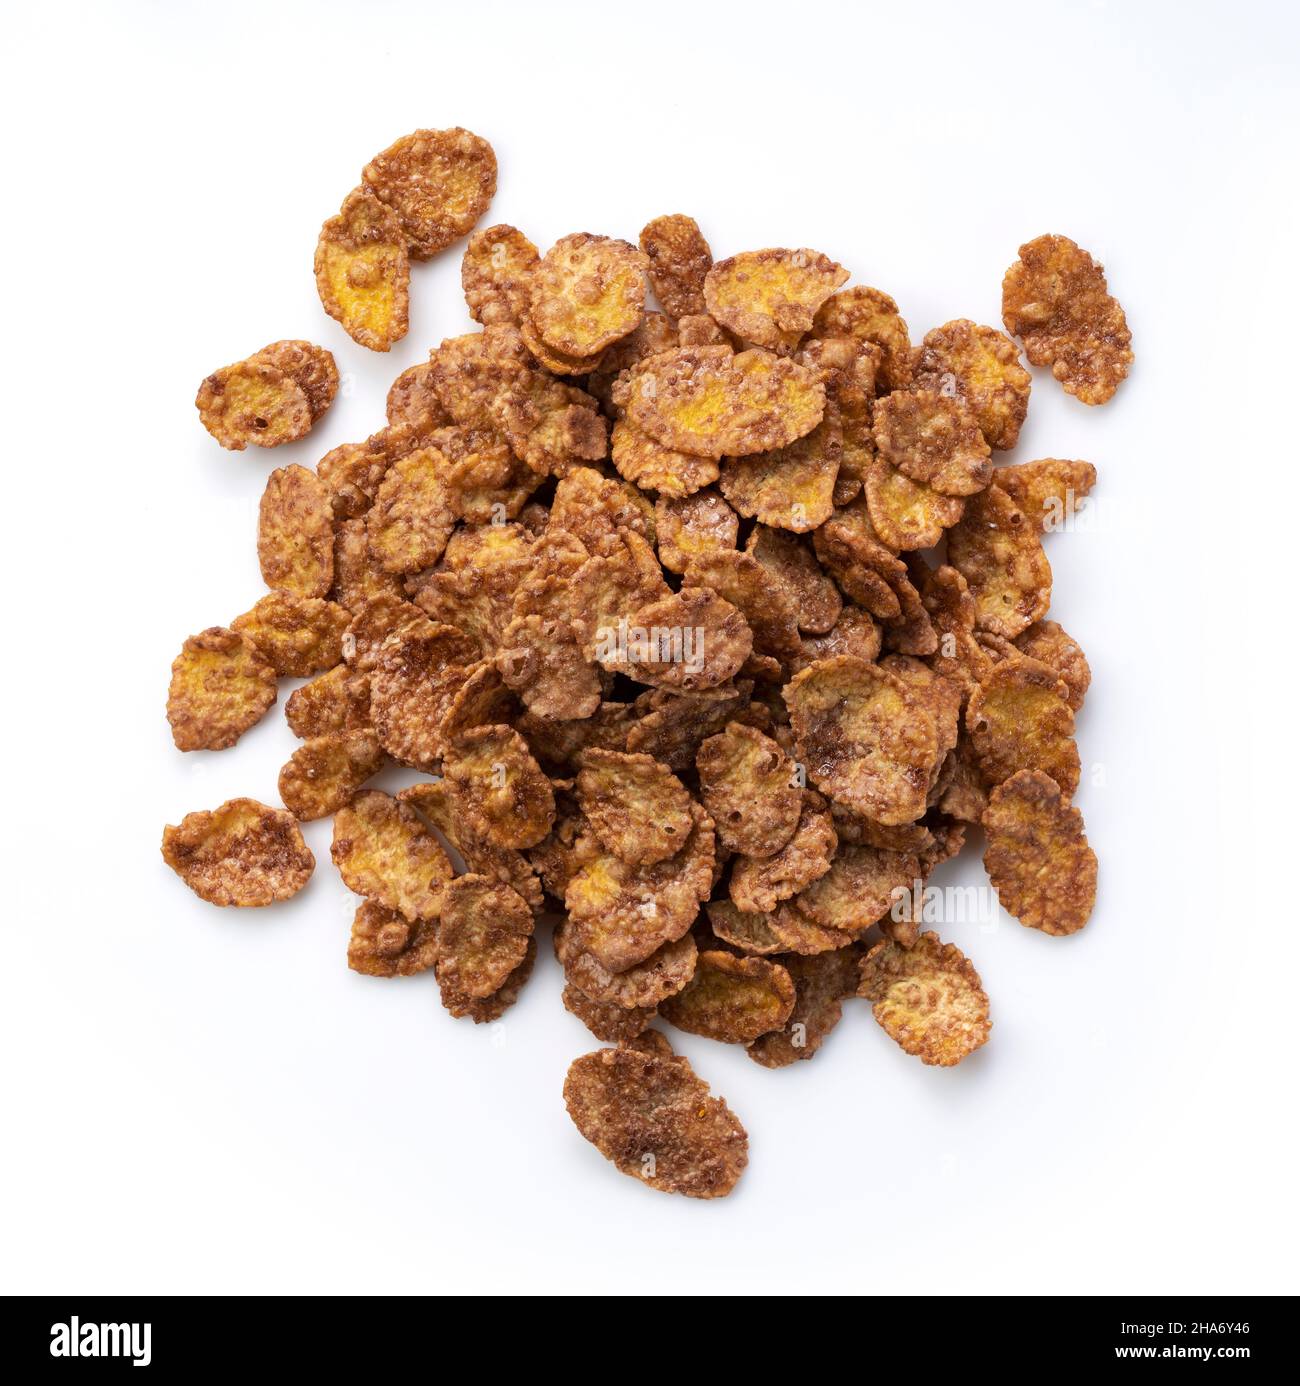 Chocolate cornflakes placed on a white background. View from directly above. Stock Photo